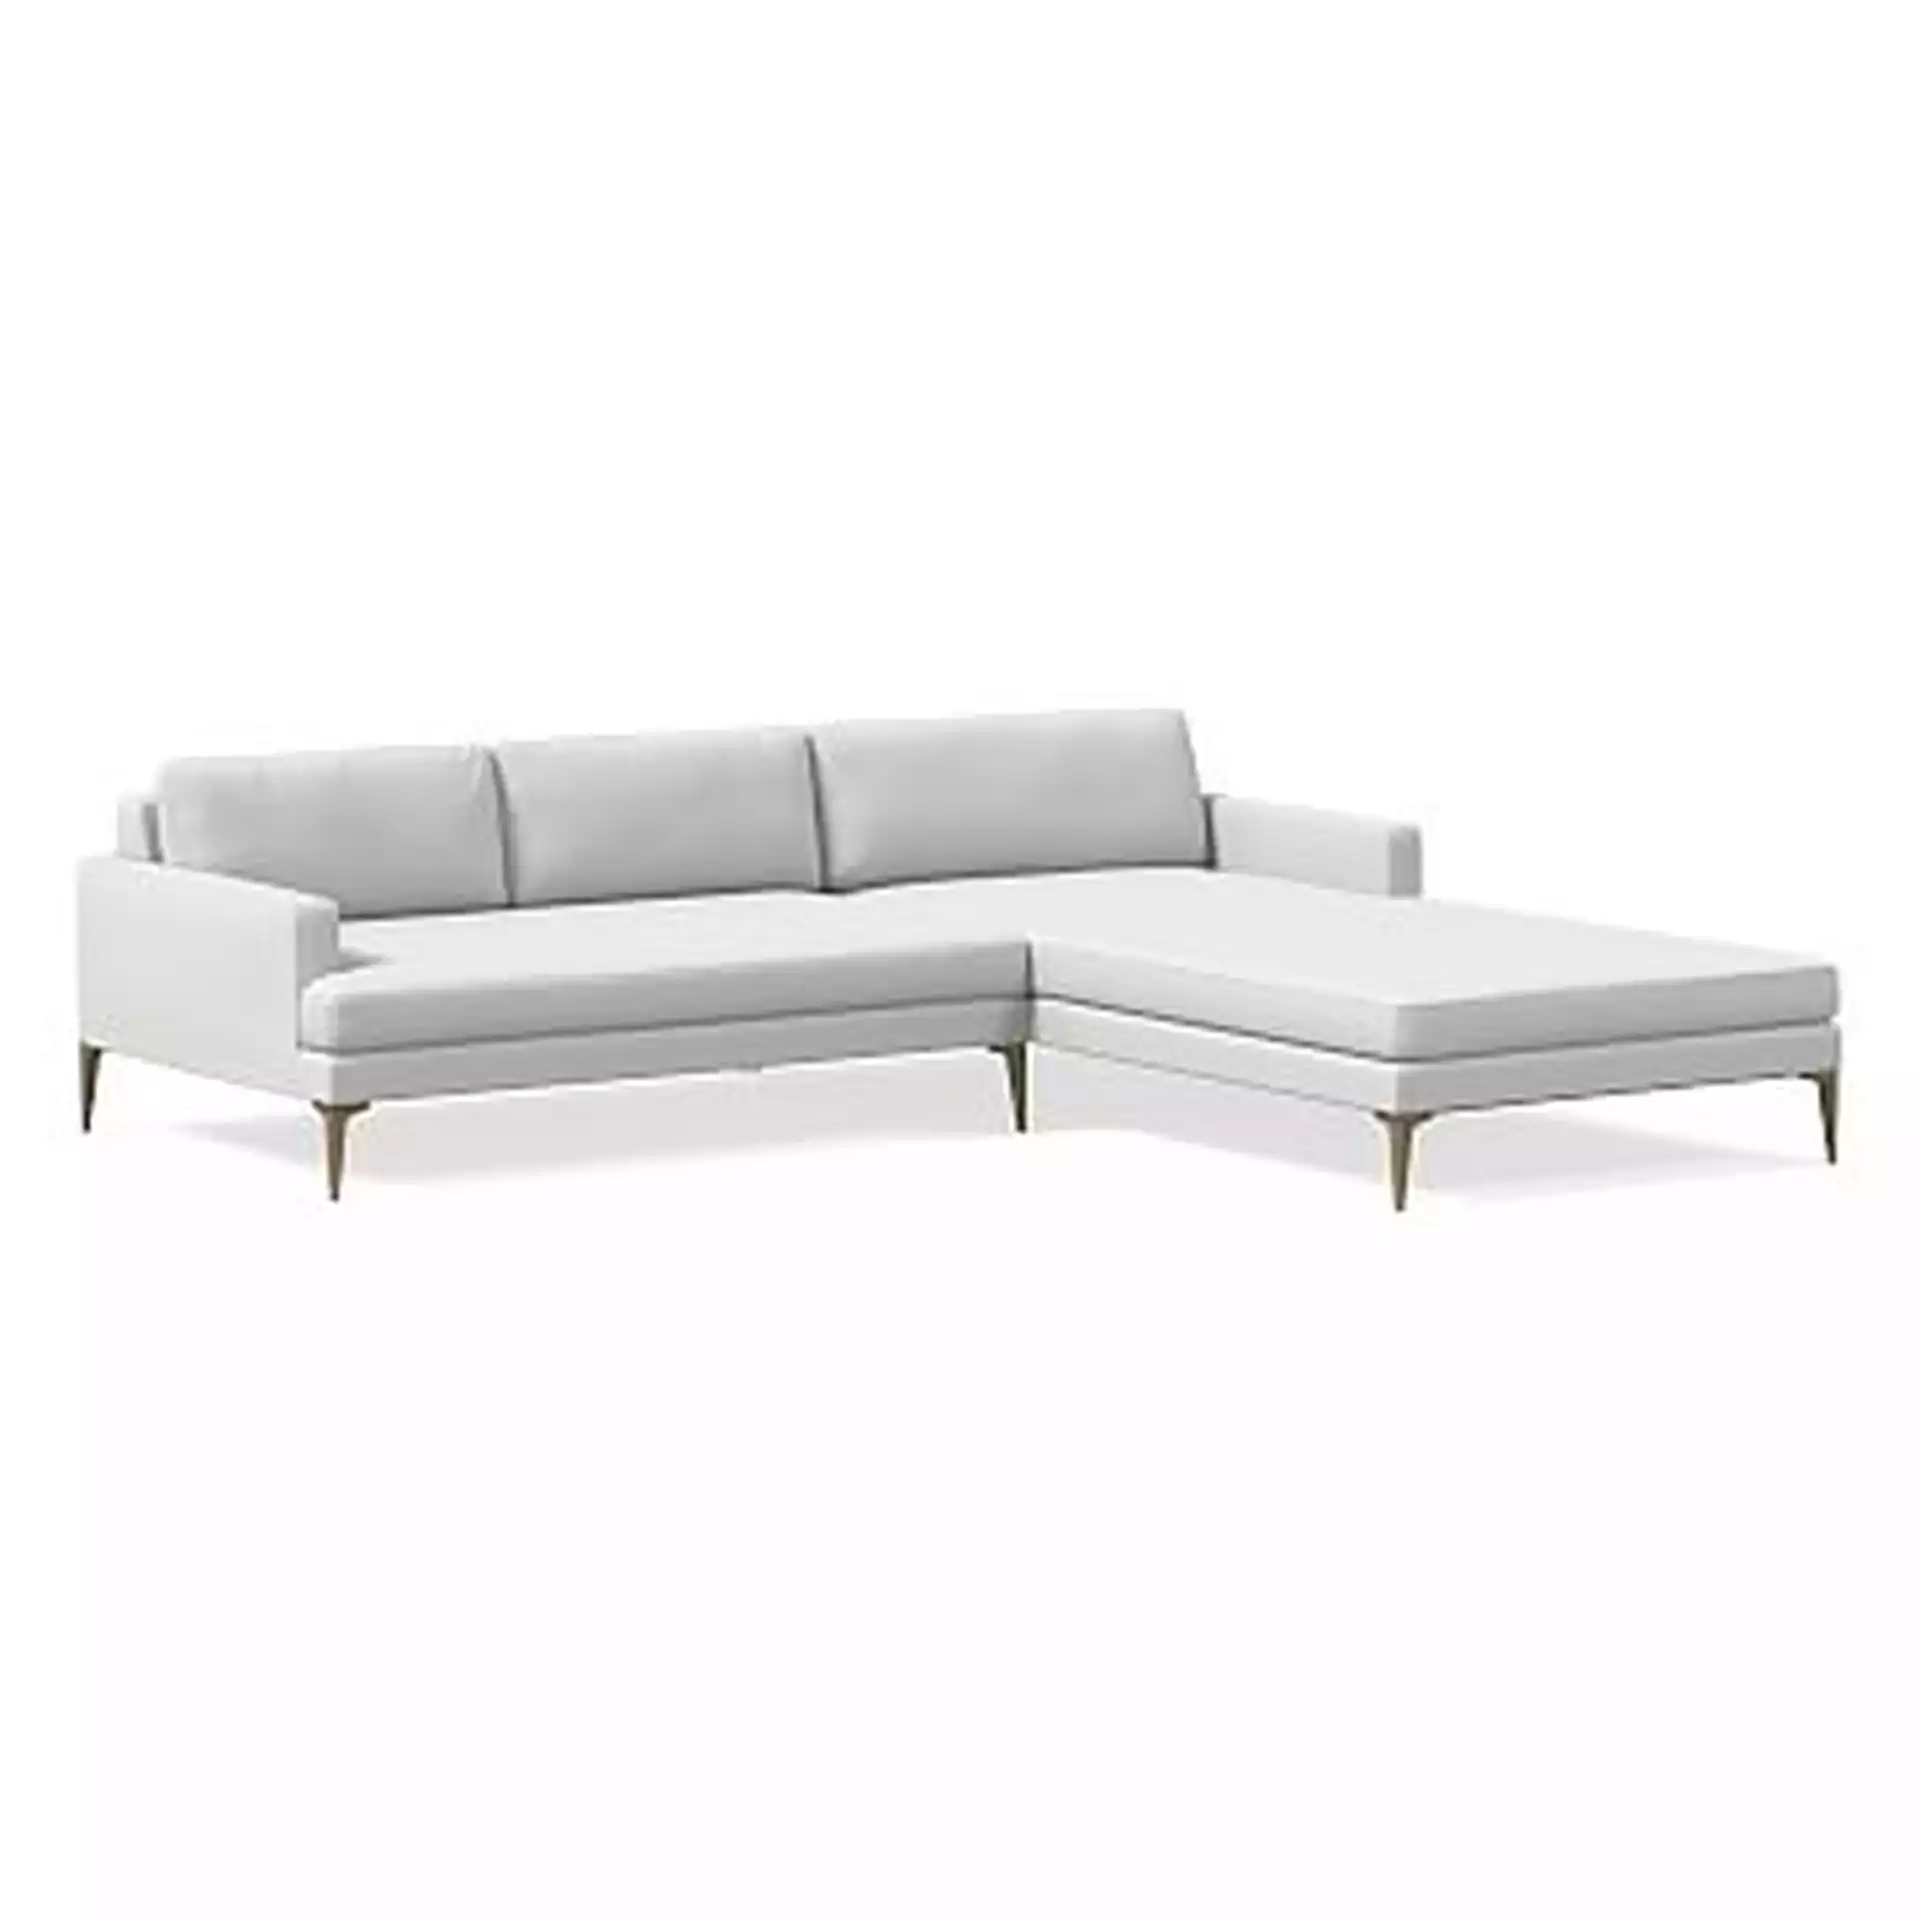 Andes Sectional Set 37: XL Left Arm 2.5 Seater Sofa, XL Right Arm Chaise, Poly, Performance Washed Canvas, White, Blackened Brass